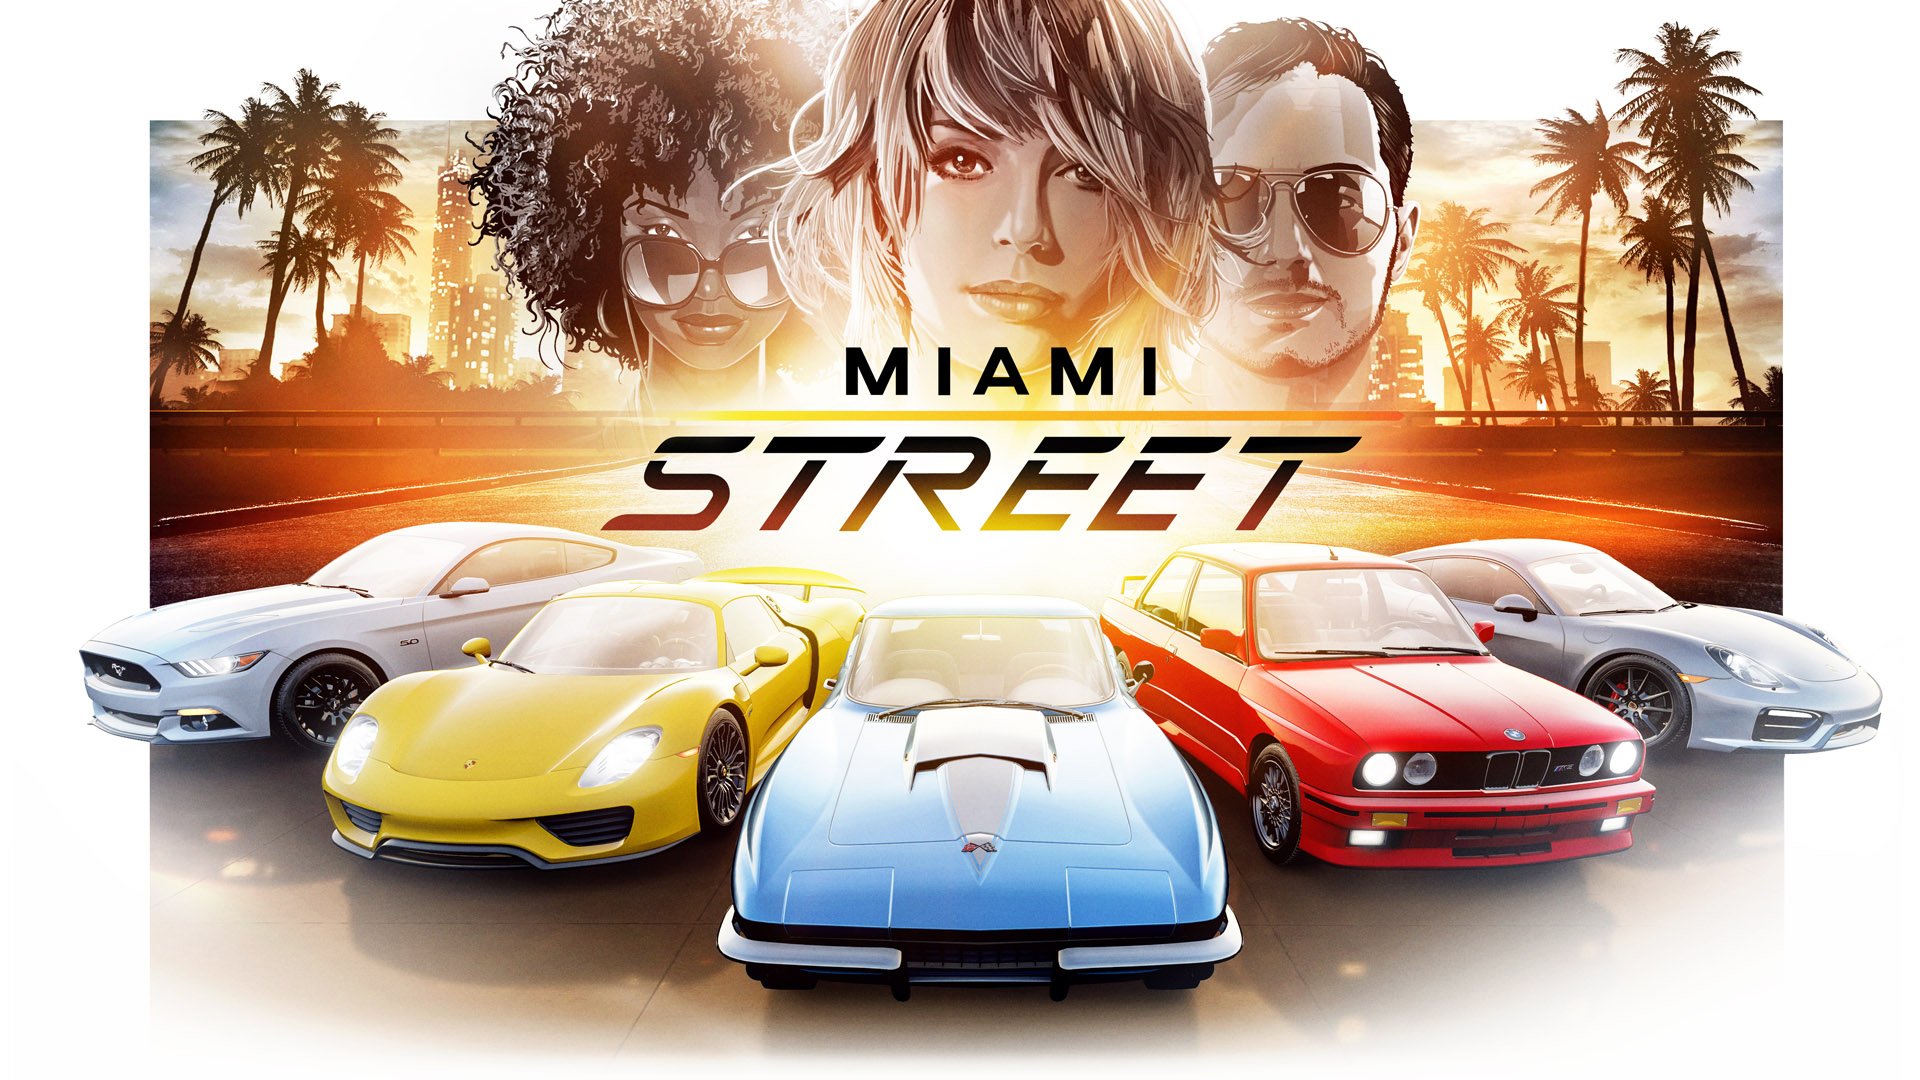 Microsoft’s Miami Street racing game has soft launched in certain territories